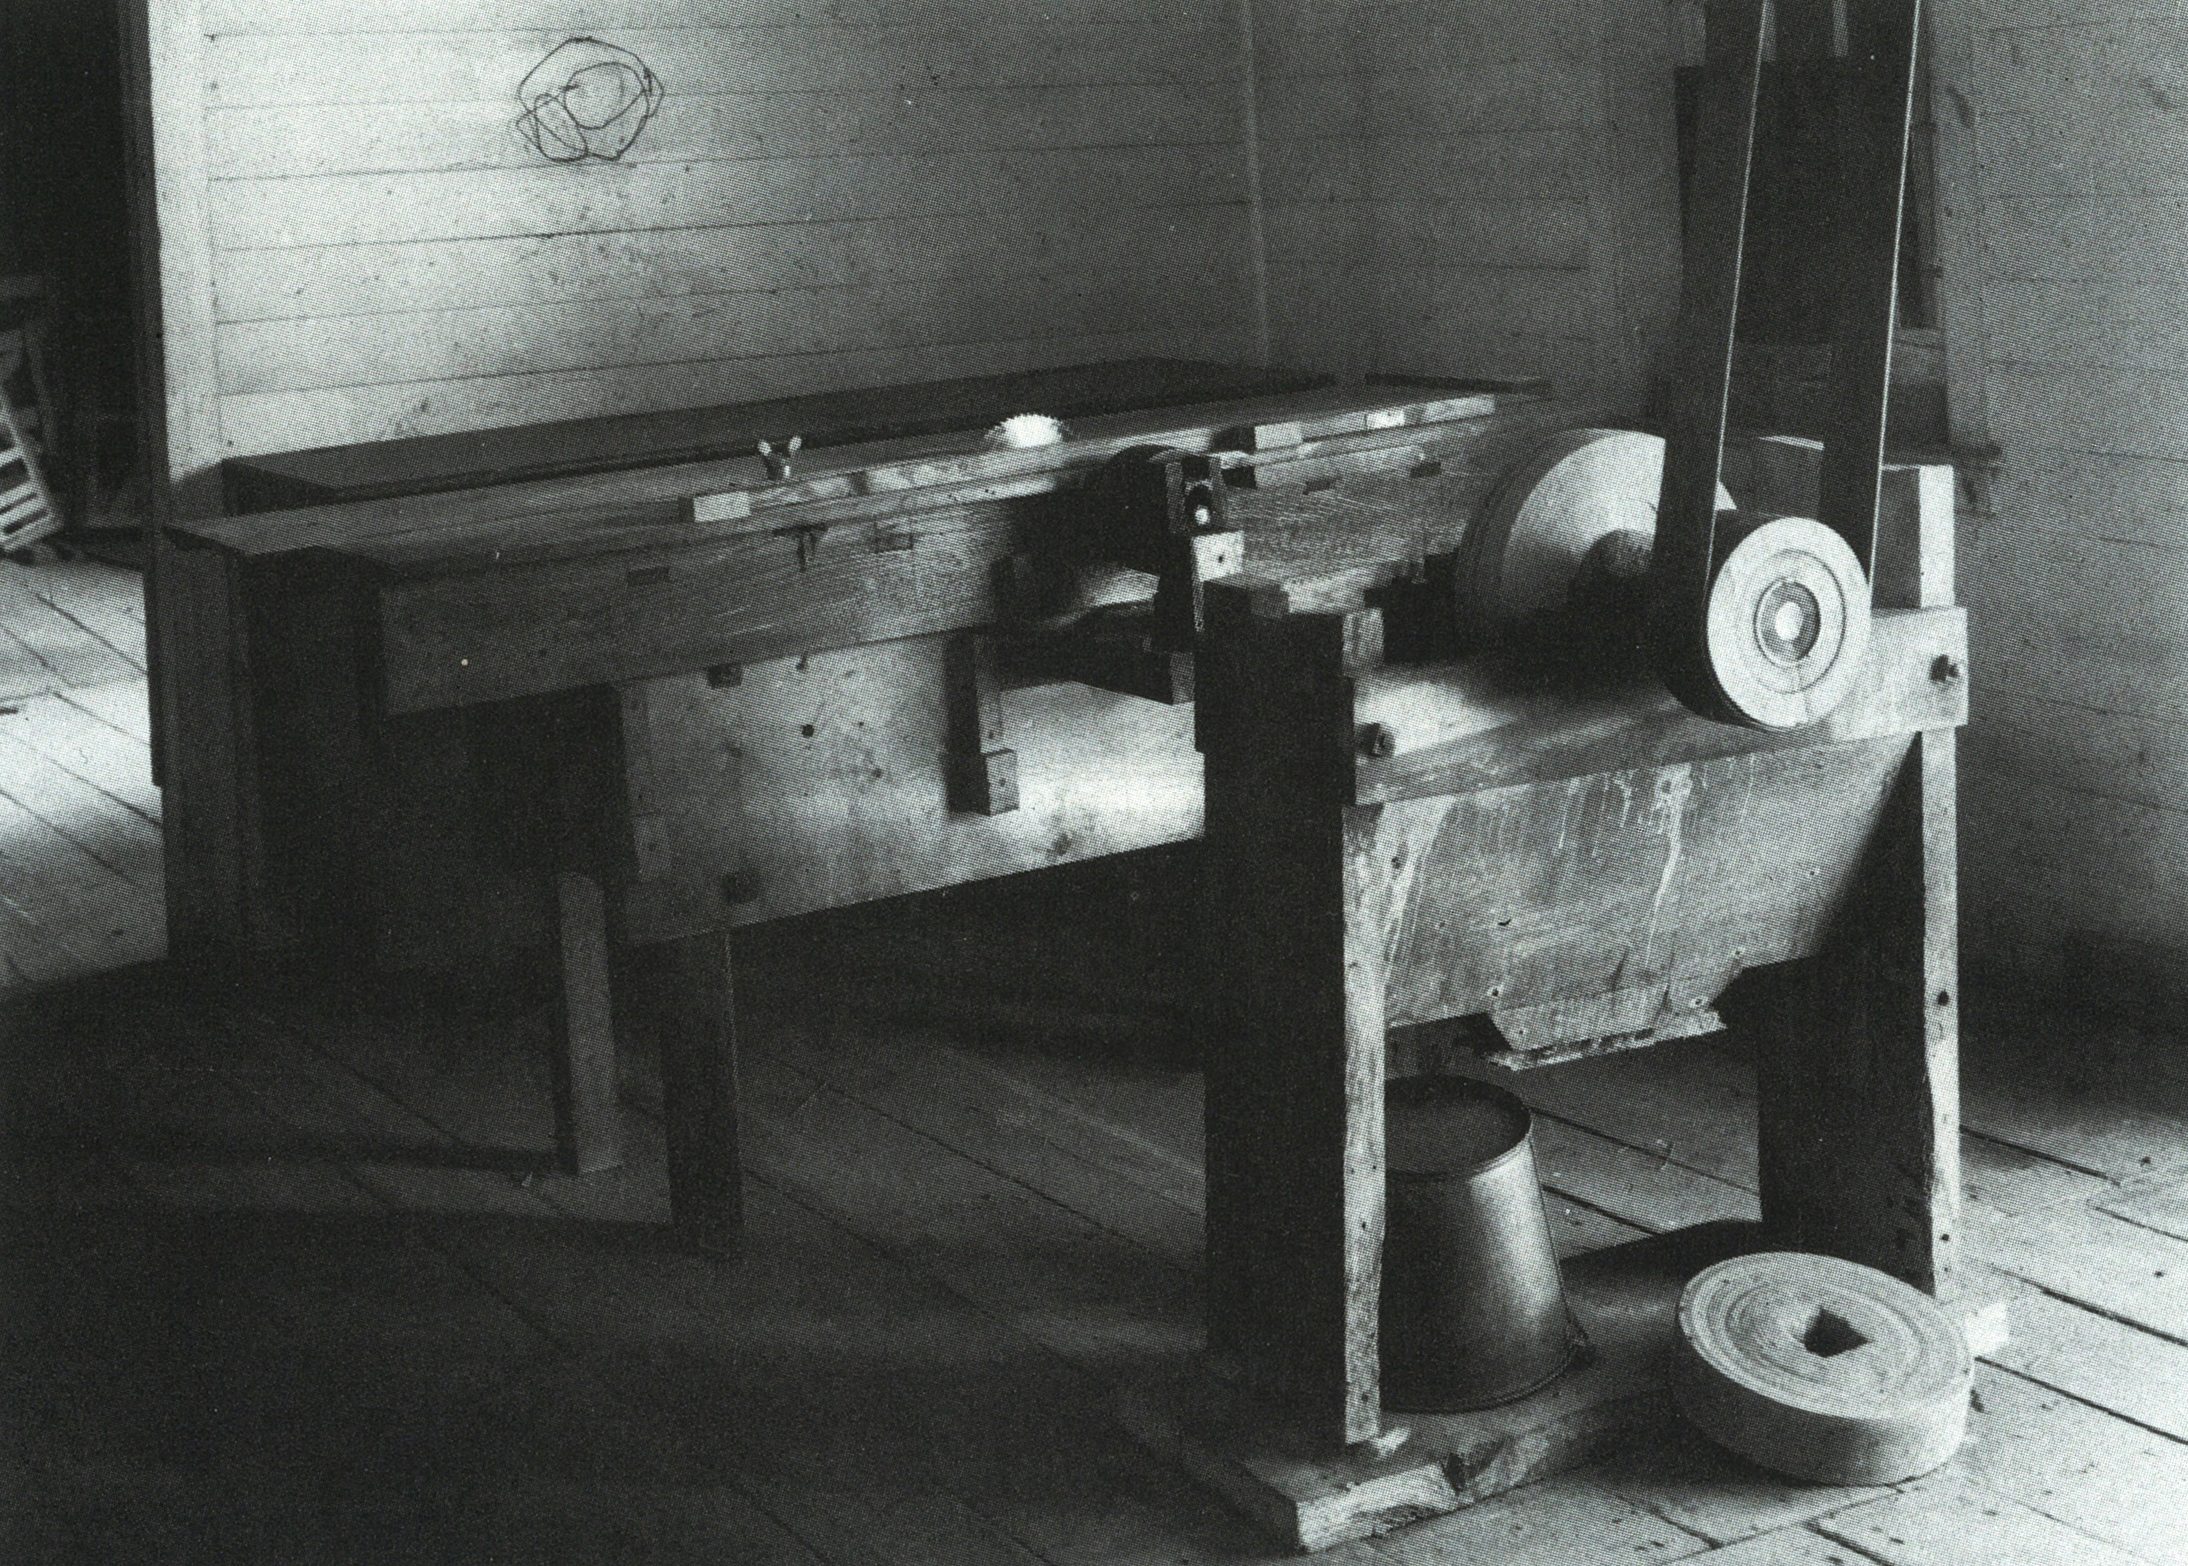 Grindstone and circular saw, North Family laundry and woodstore, Mount Lebanon Shaker Village, NY